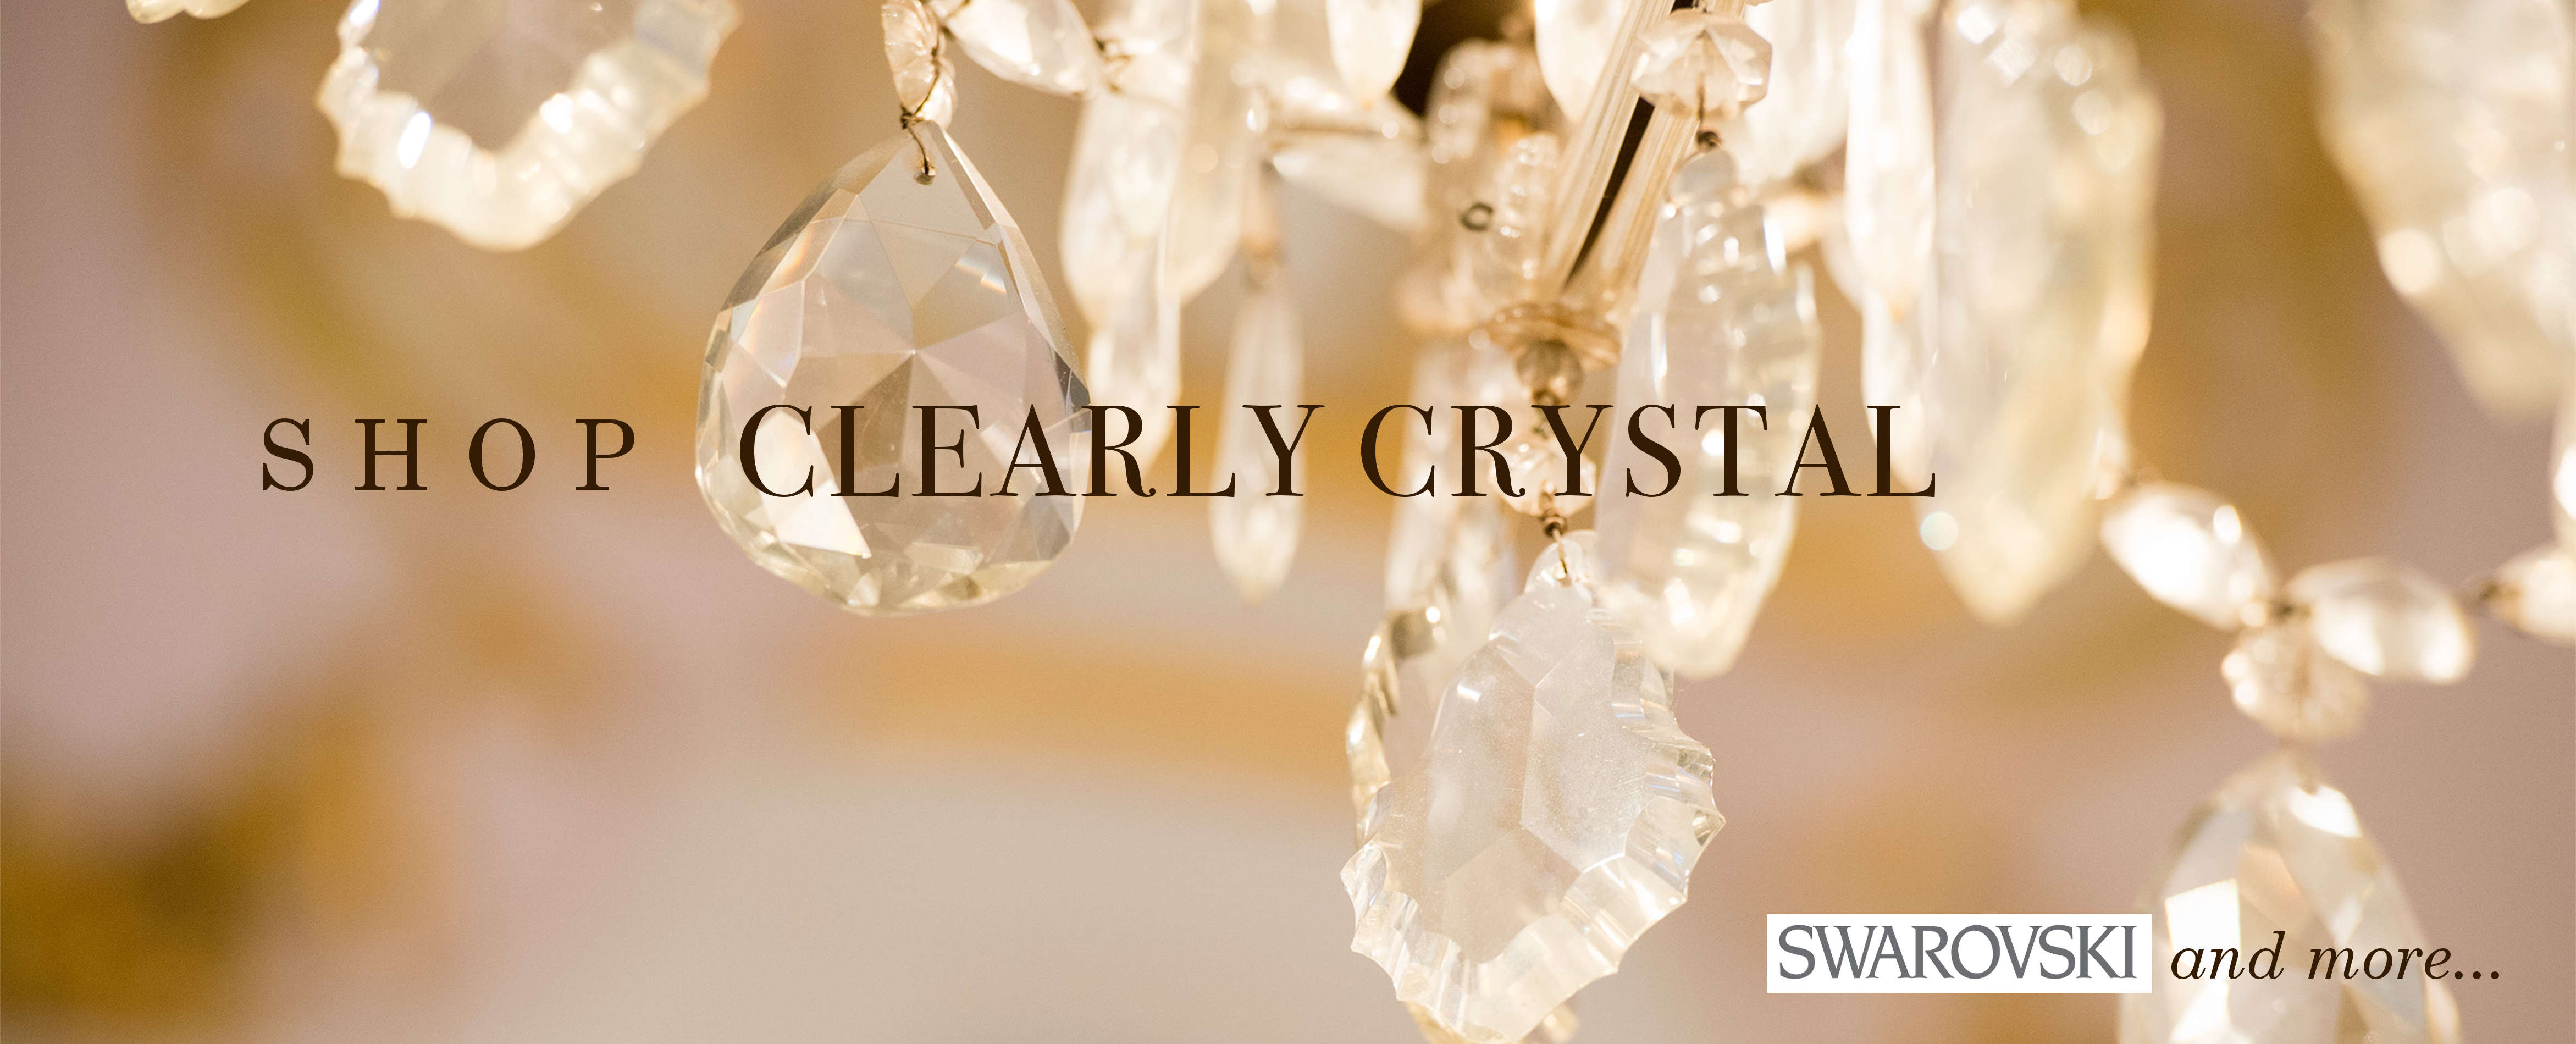 Clearly Crystal